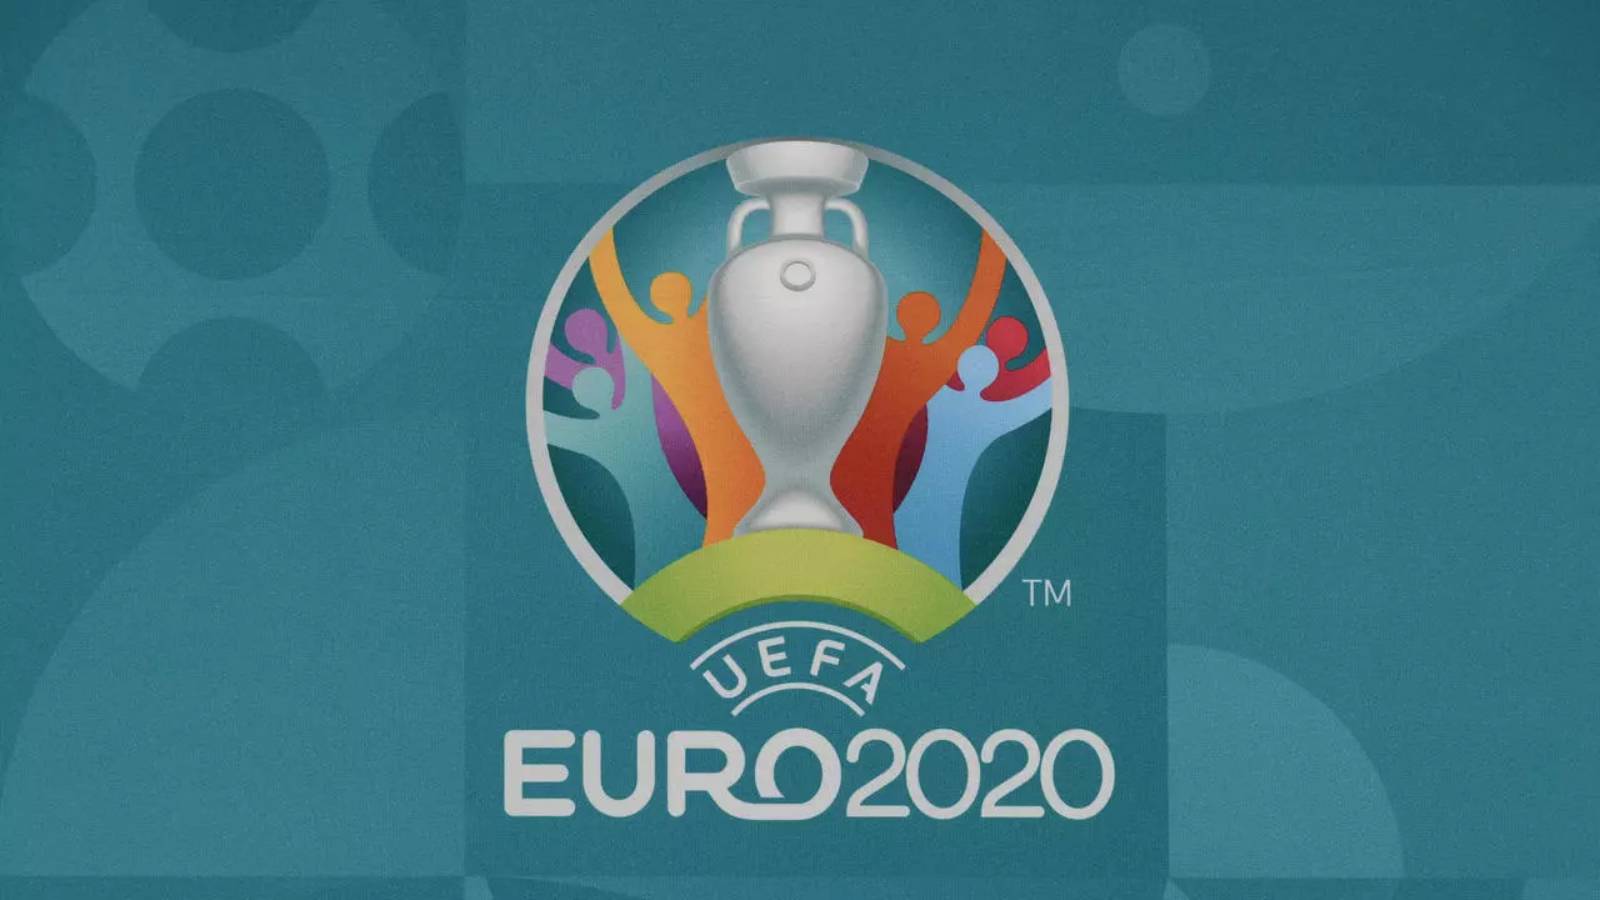 FRF Access to the EURO 2020 National Arena Matches